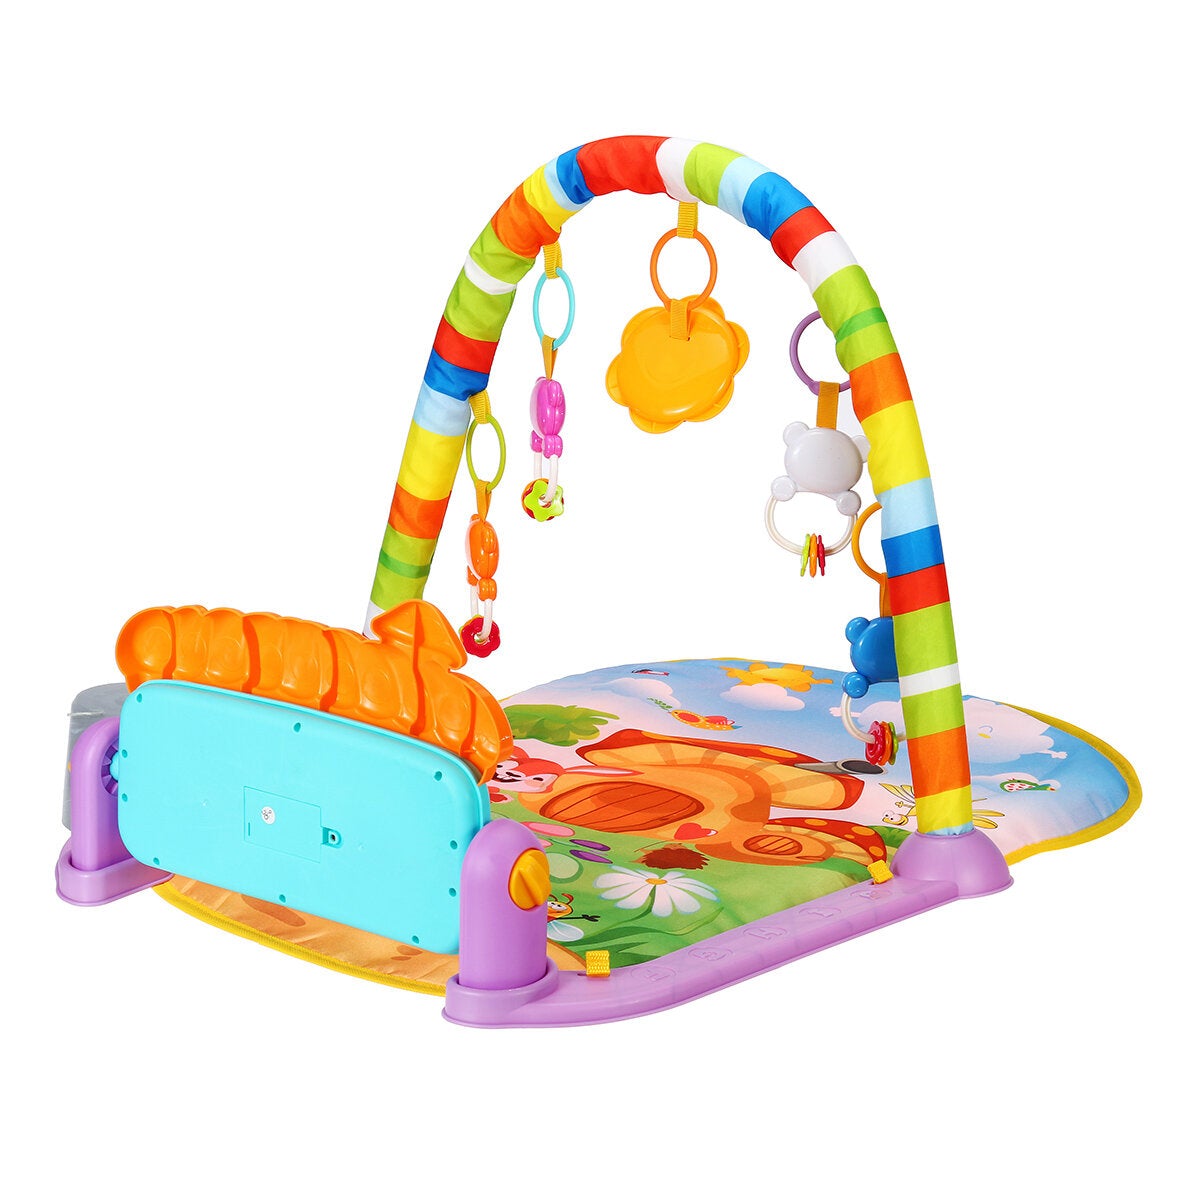 5 in 1 Piano Musical Educational Playmat Toys Baby Infant Gym Activity Floor Play Mat for Boy Girl Development Play Mat